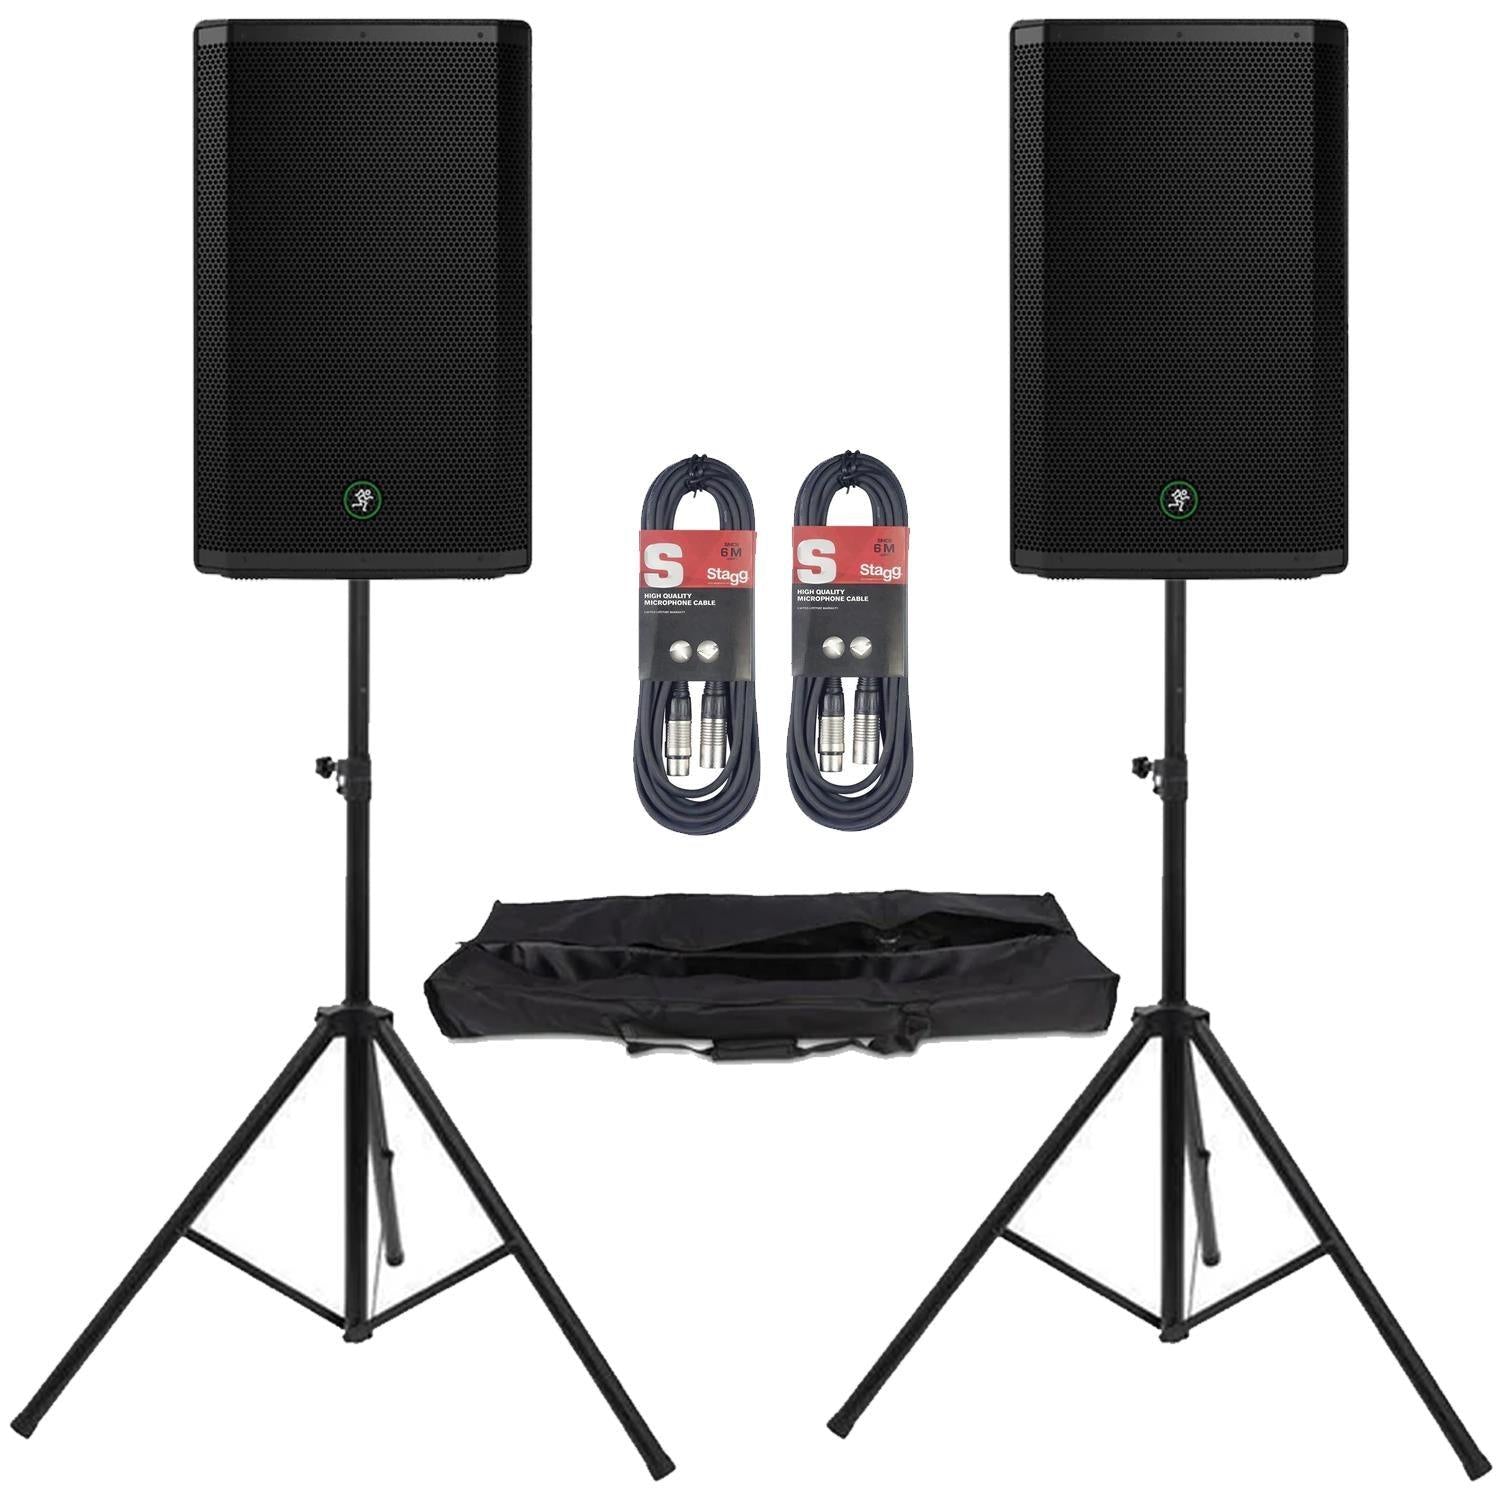 2 x Mackie Thrash 215 12" PA Speaker with Stands and Cables - DY Pro Audio